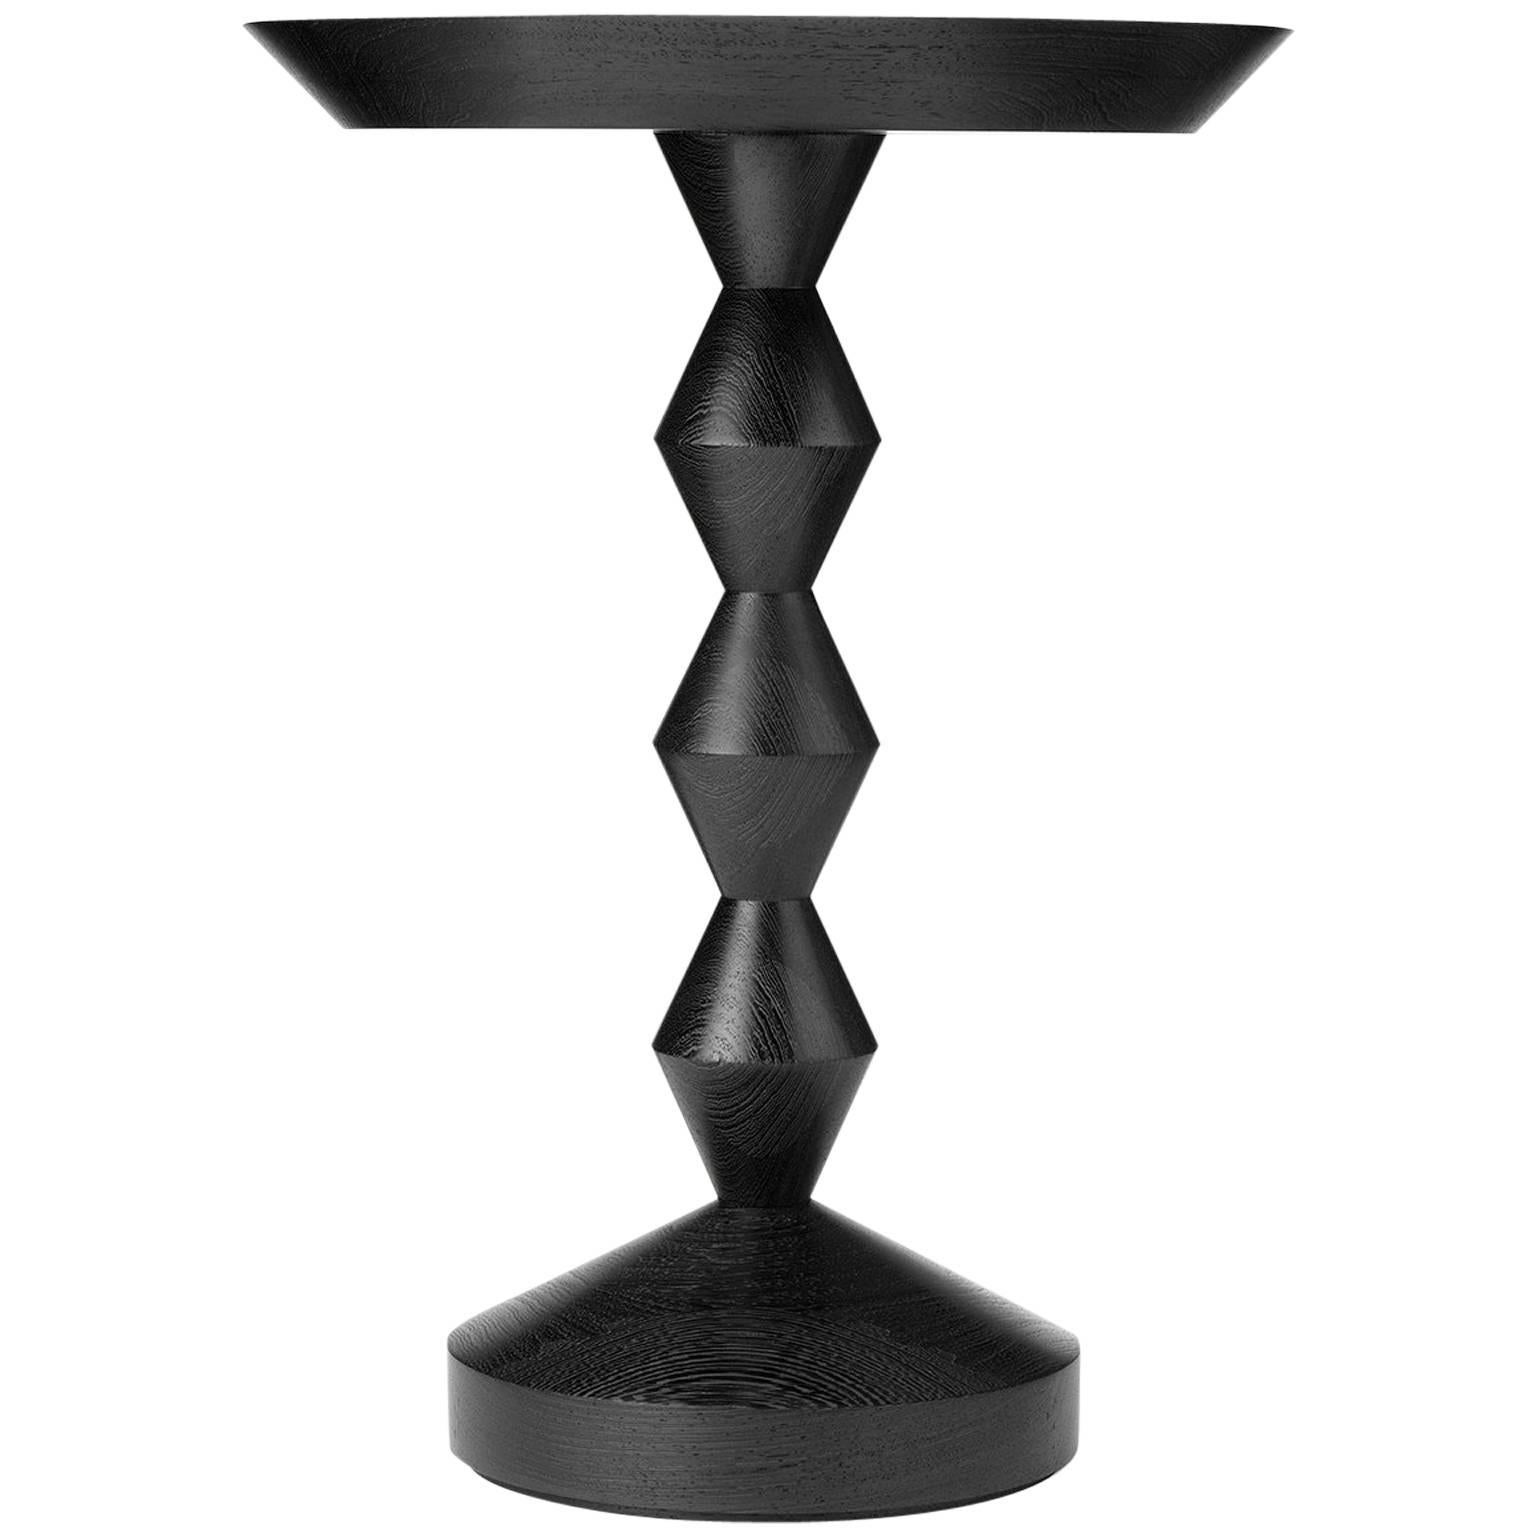 Like many of our tables this piece is turned from solid timber and therefore has a natural beauty, strength and durability. The slender zigzag shaped stem endows it with great elegance and delicacy. Shown here: in ebonised oak.

Each Stuart Scott